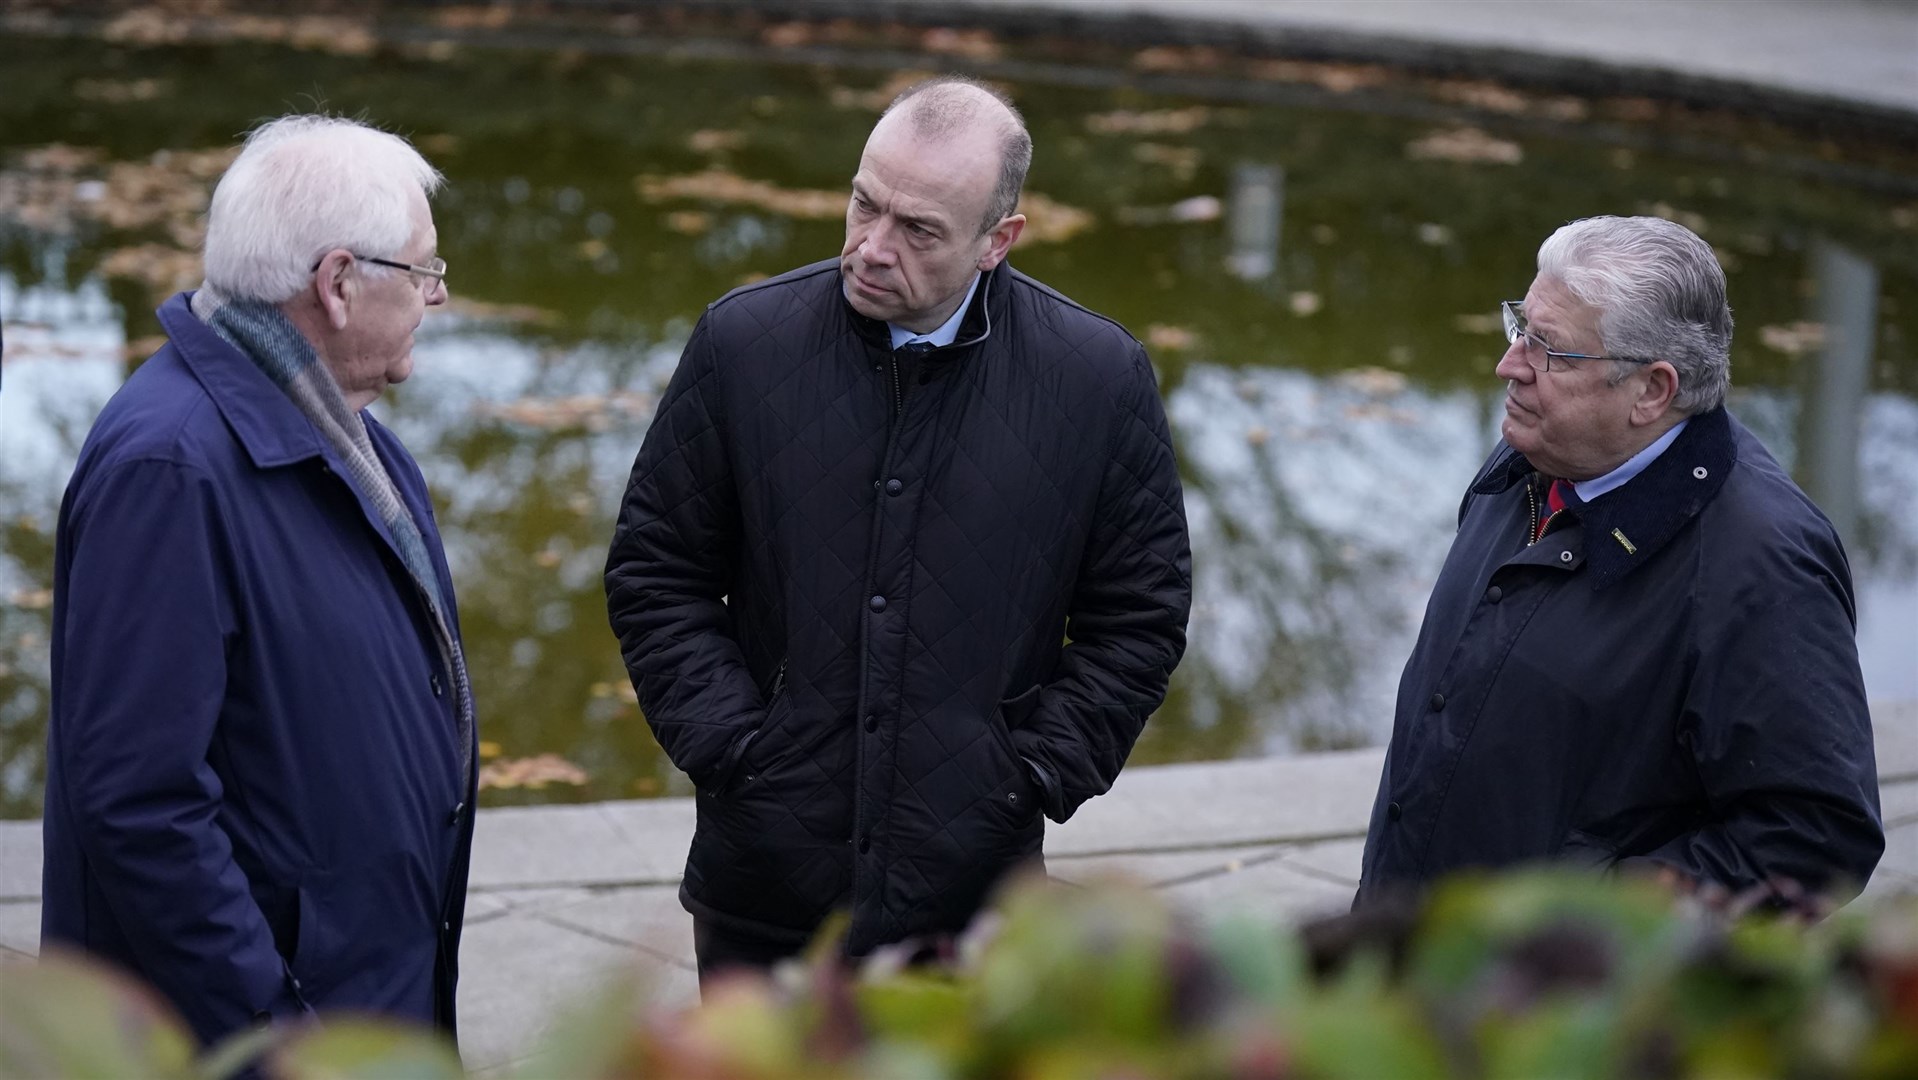 Northern Ireland Secretary Chris Heaton-Harris, centre, met with Stanley McCombe, right, who lost his wife Ann in the blast, and Michael Gallagher, who lost his son Aiden, in December (Niall Carson/PA)